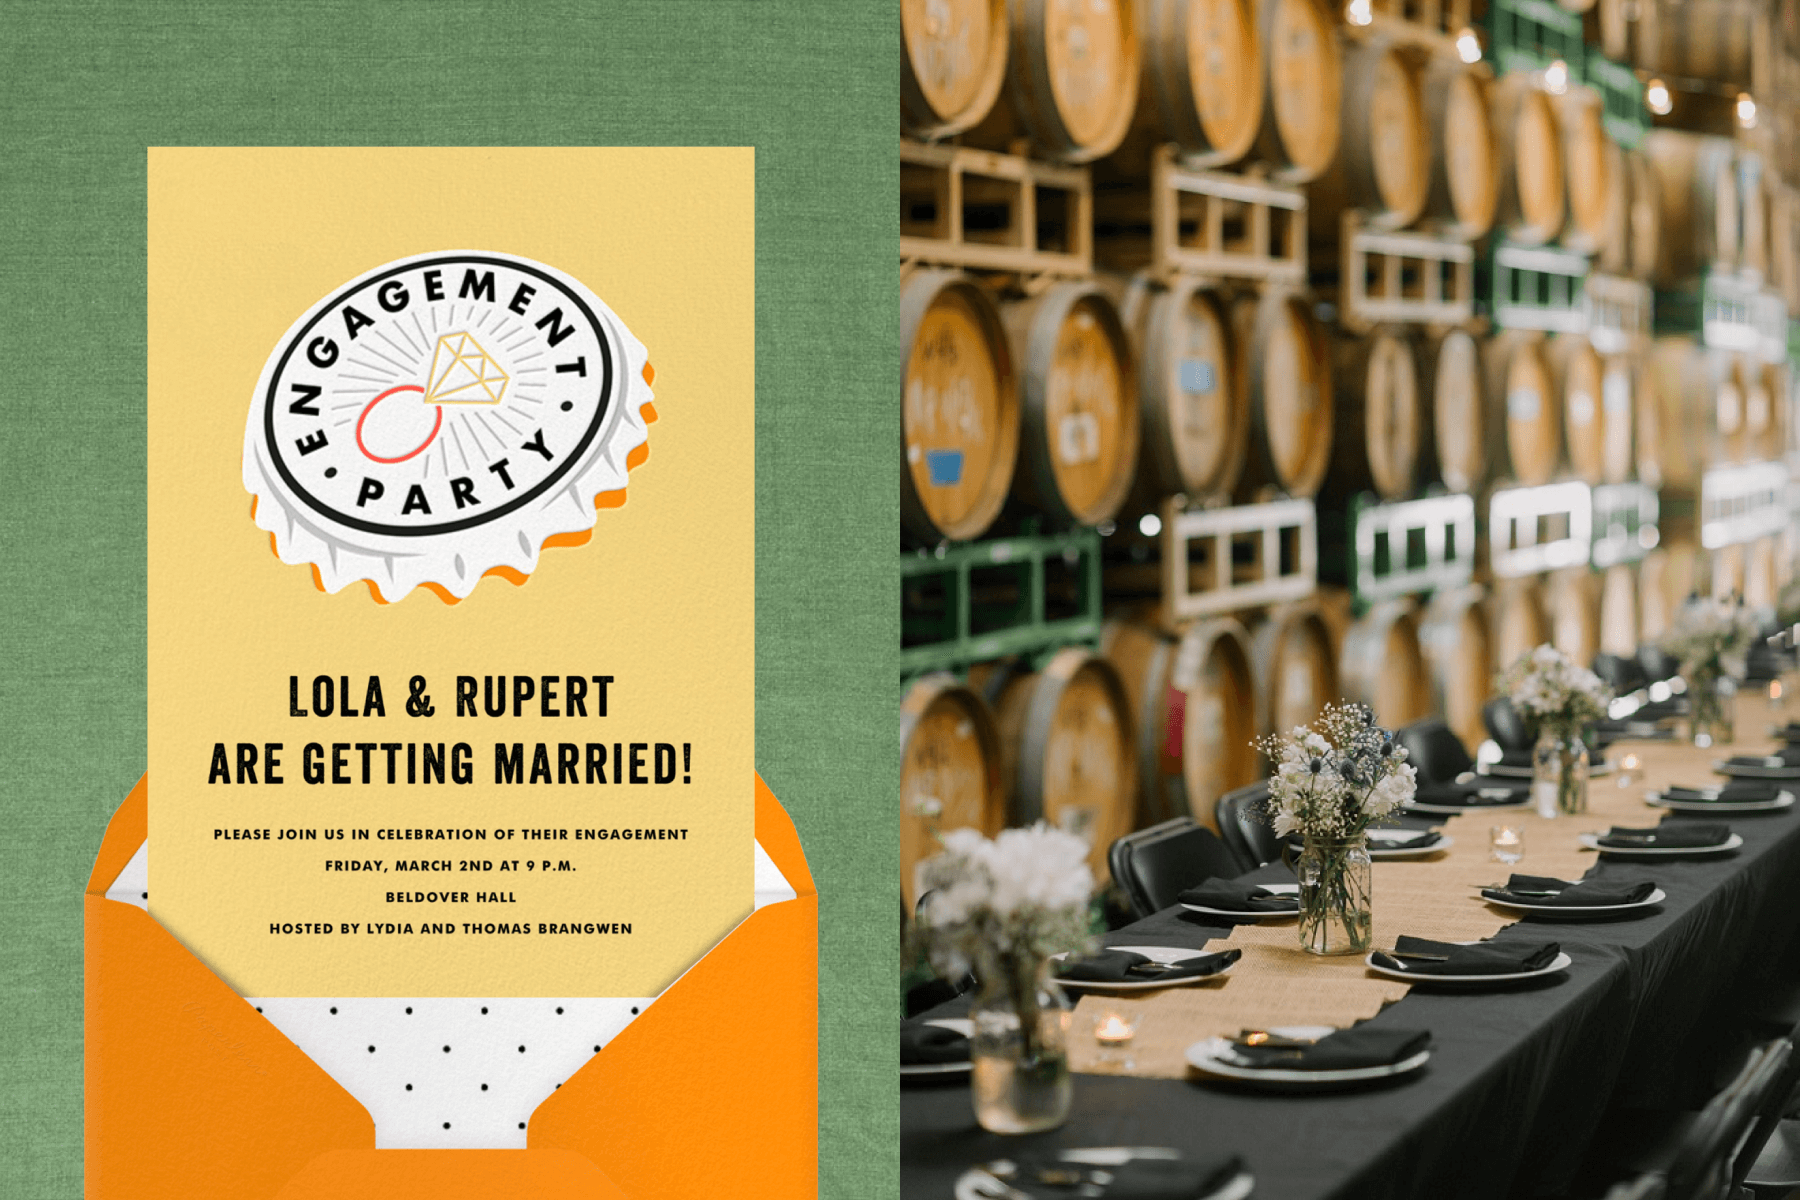 left: A yellow engagement party invitation with a bottle cap illustration with a diamond ring in the center. Right: A long table is minimally set with a black tablecloth in front of a wall of wooden kegs.